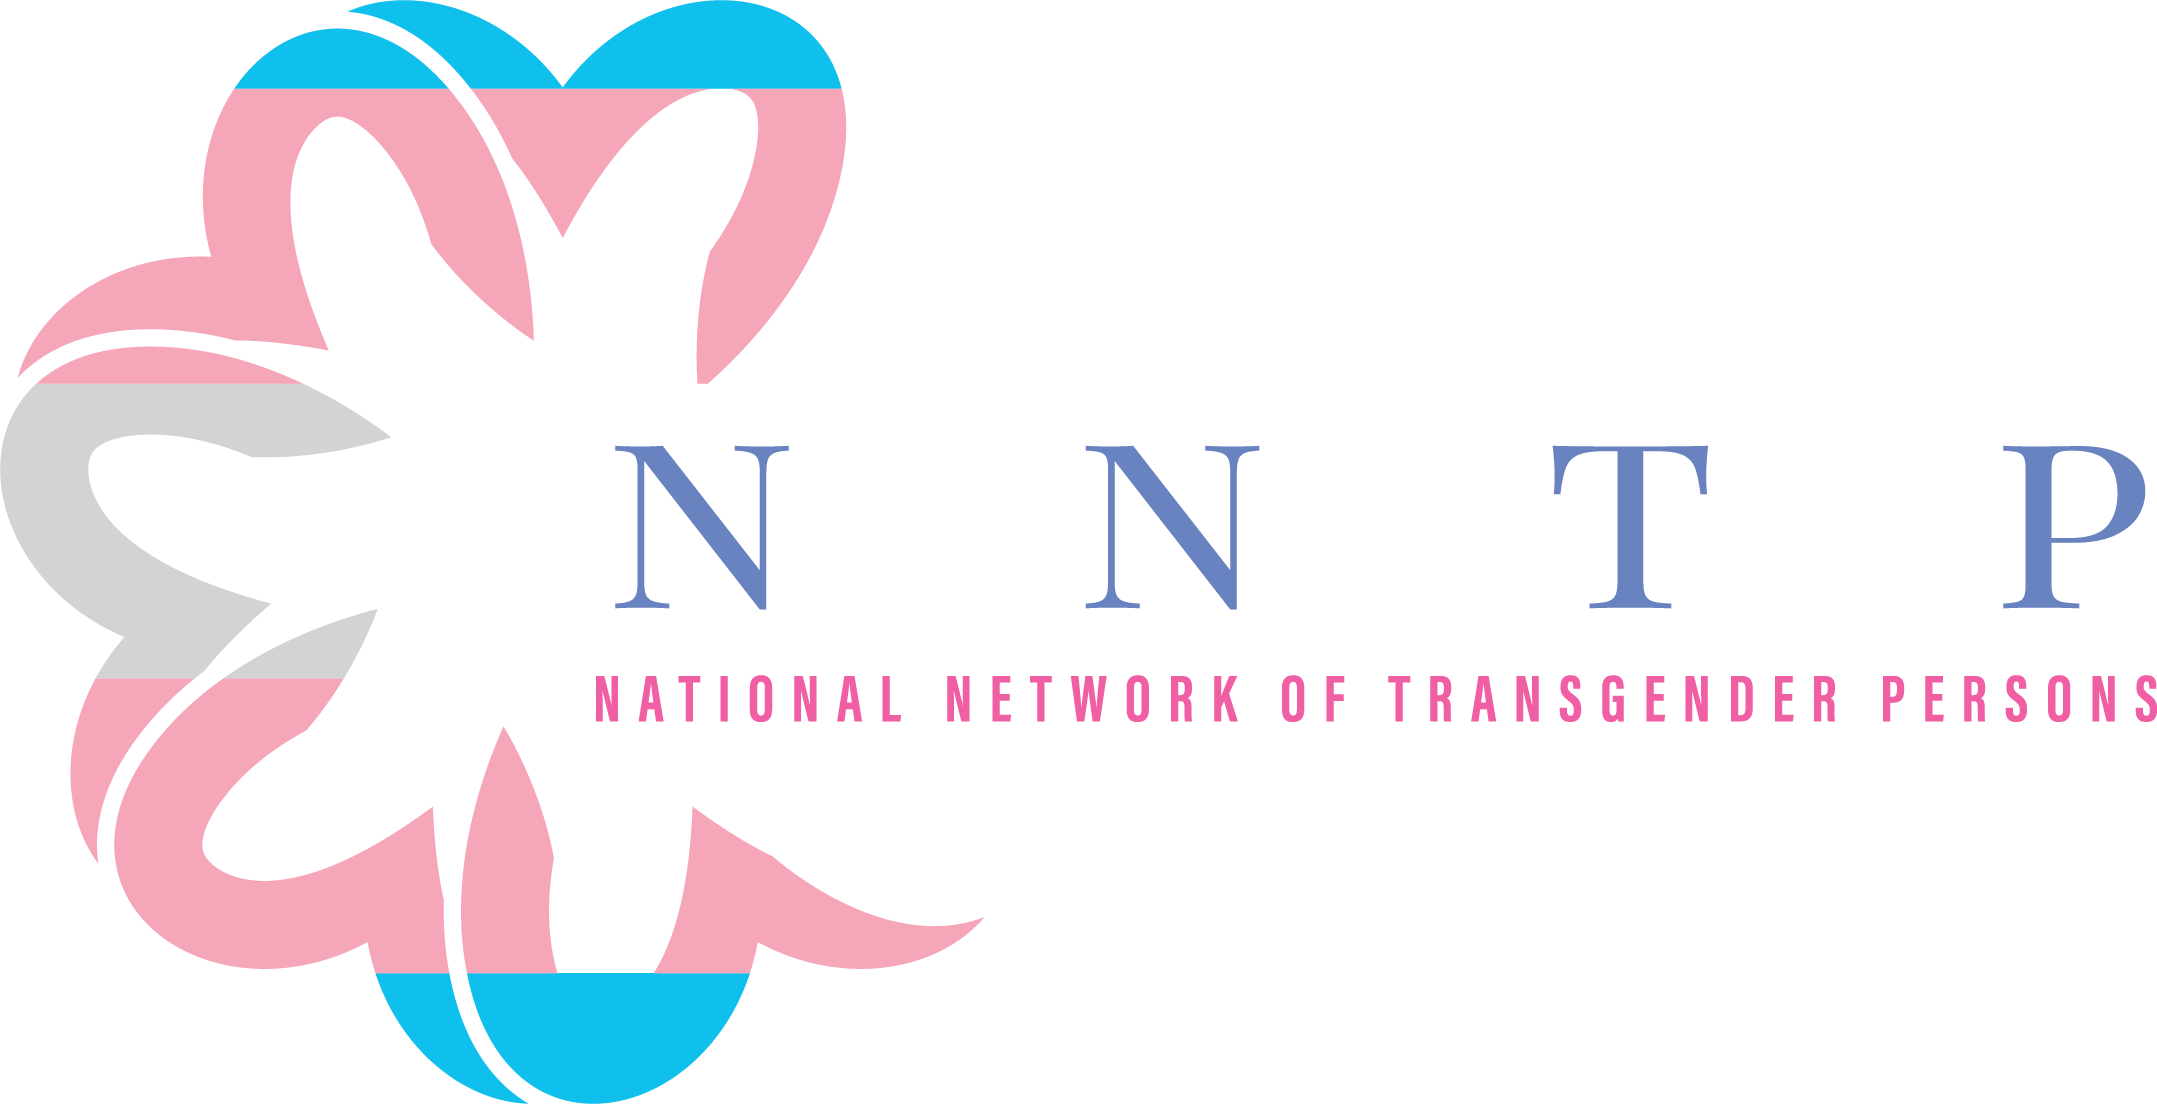 The National Network of Transgender Persons